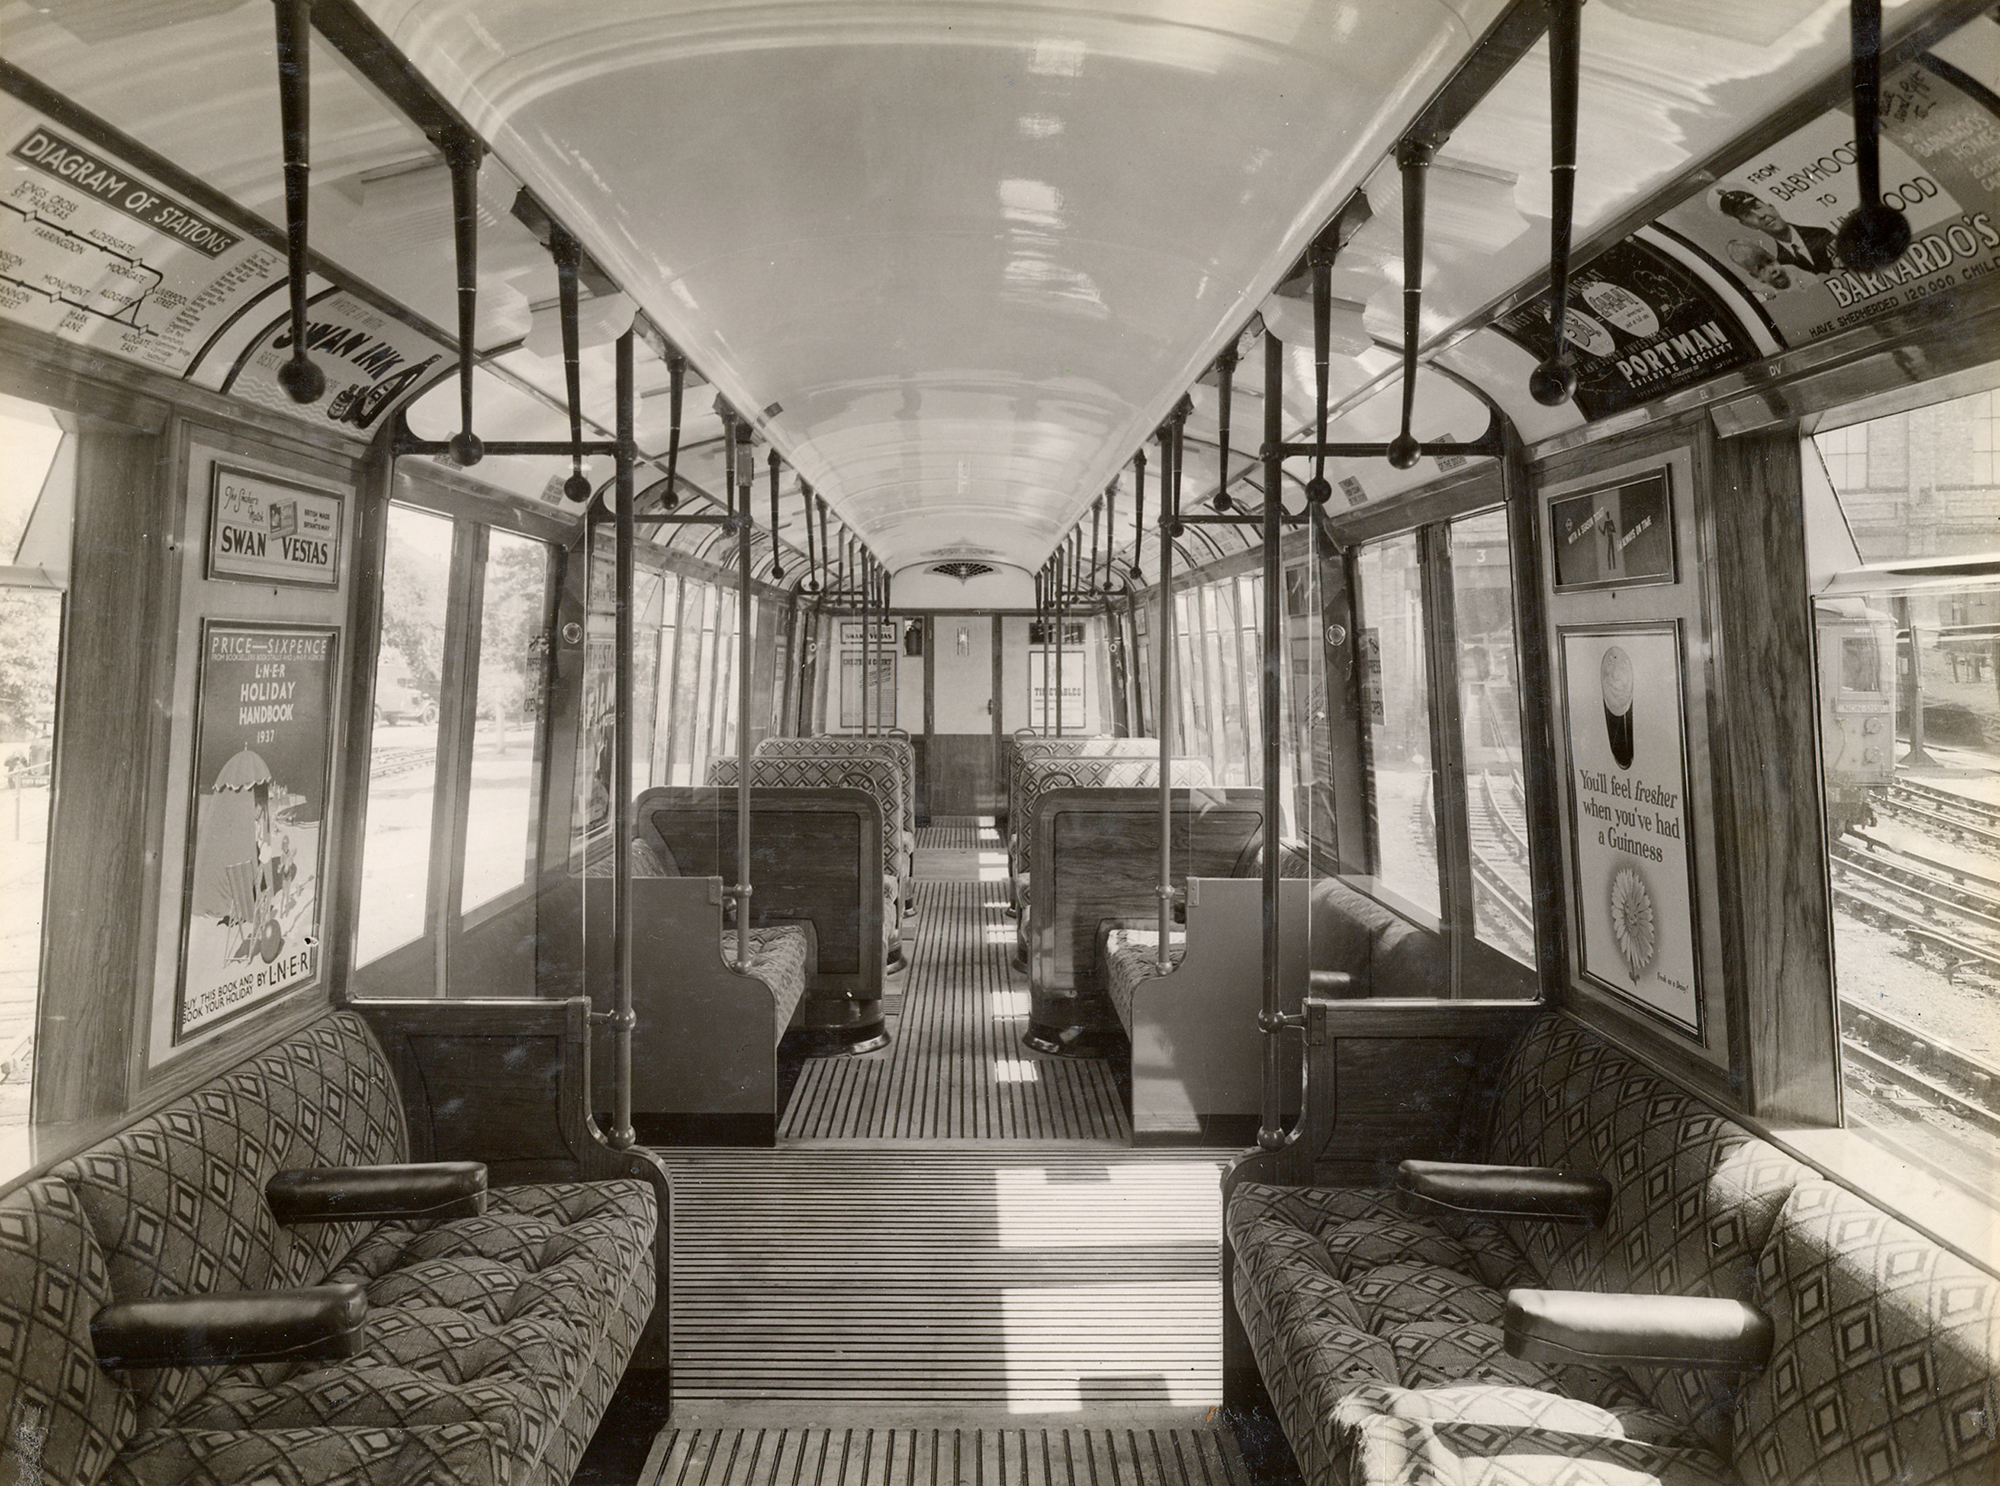 Interior of tube carriage